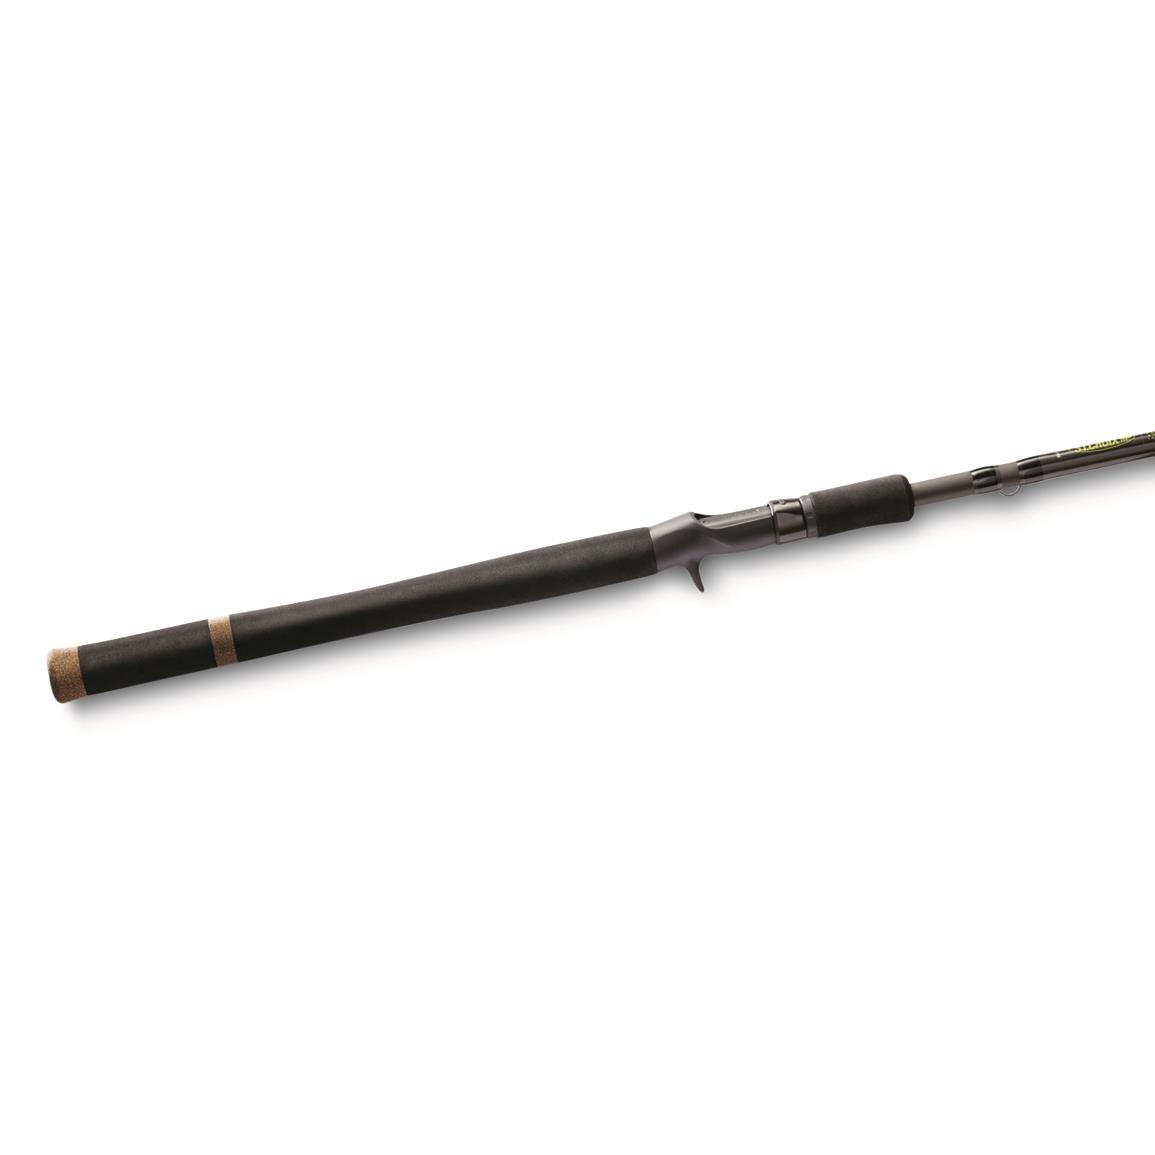 St. Croix Bass X Casting Rod, 7'10" Length, Heavy Power, Fast Action